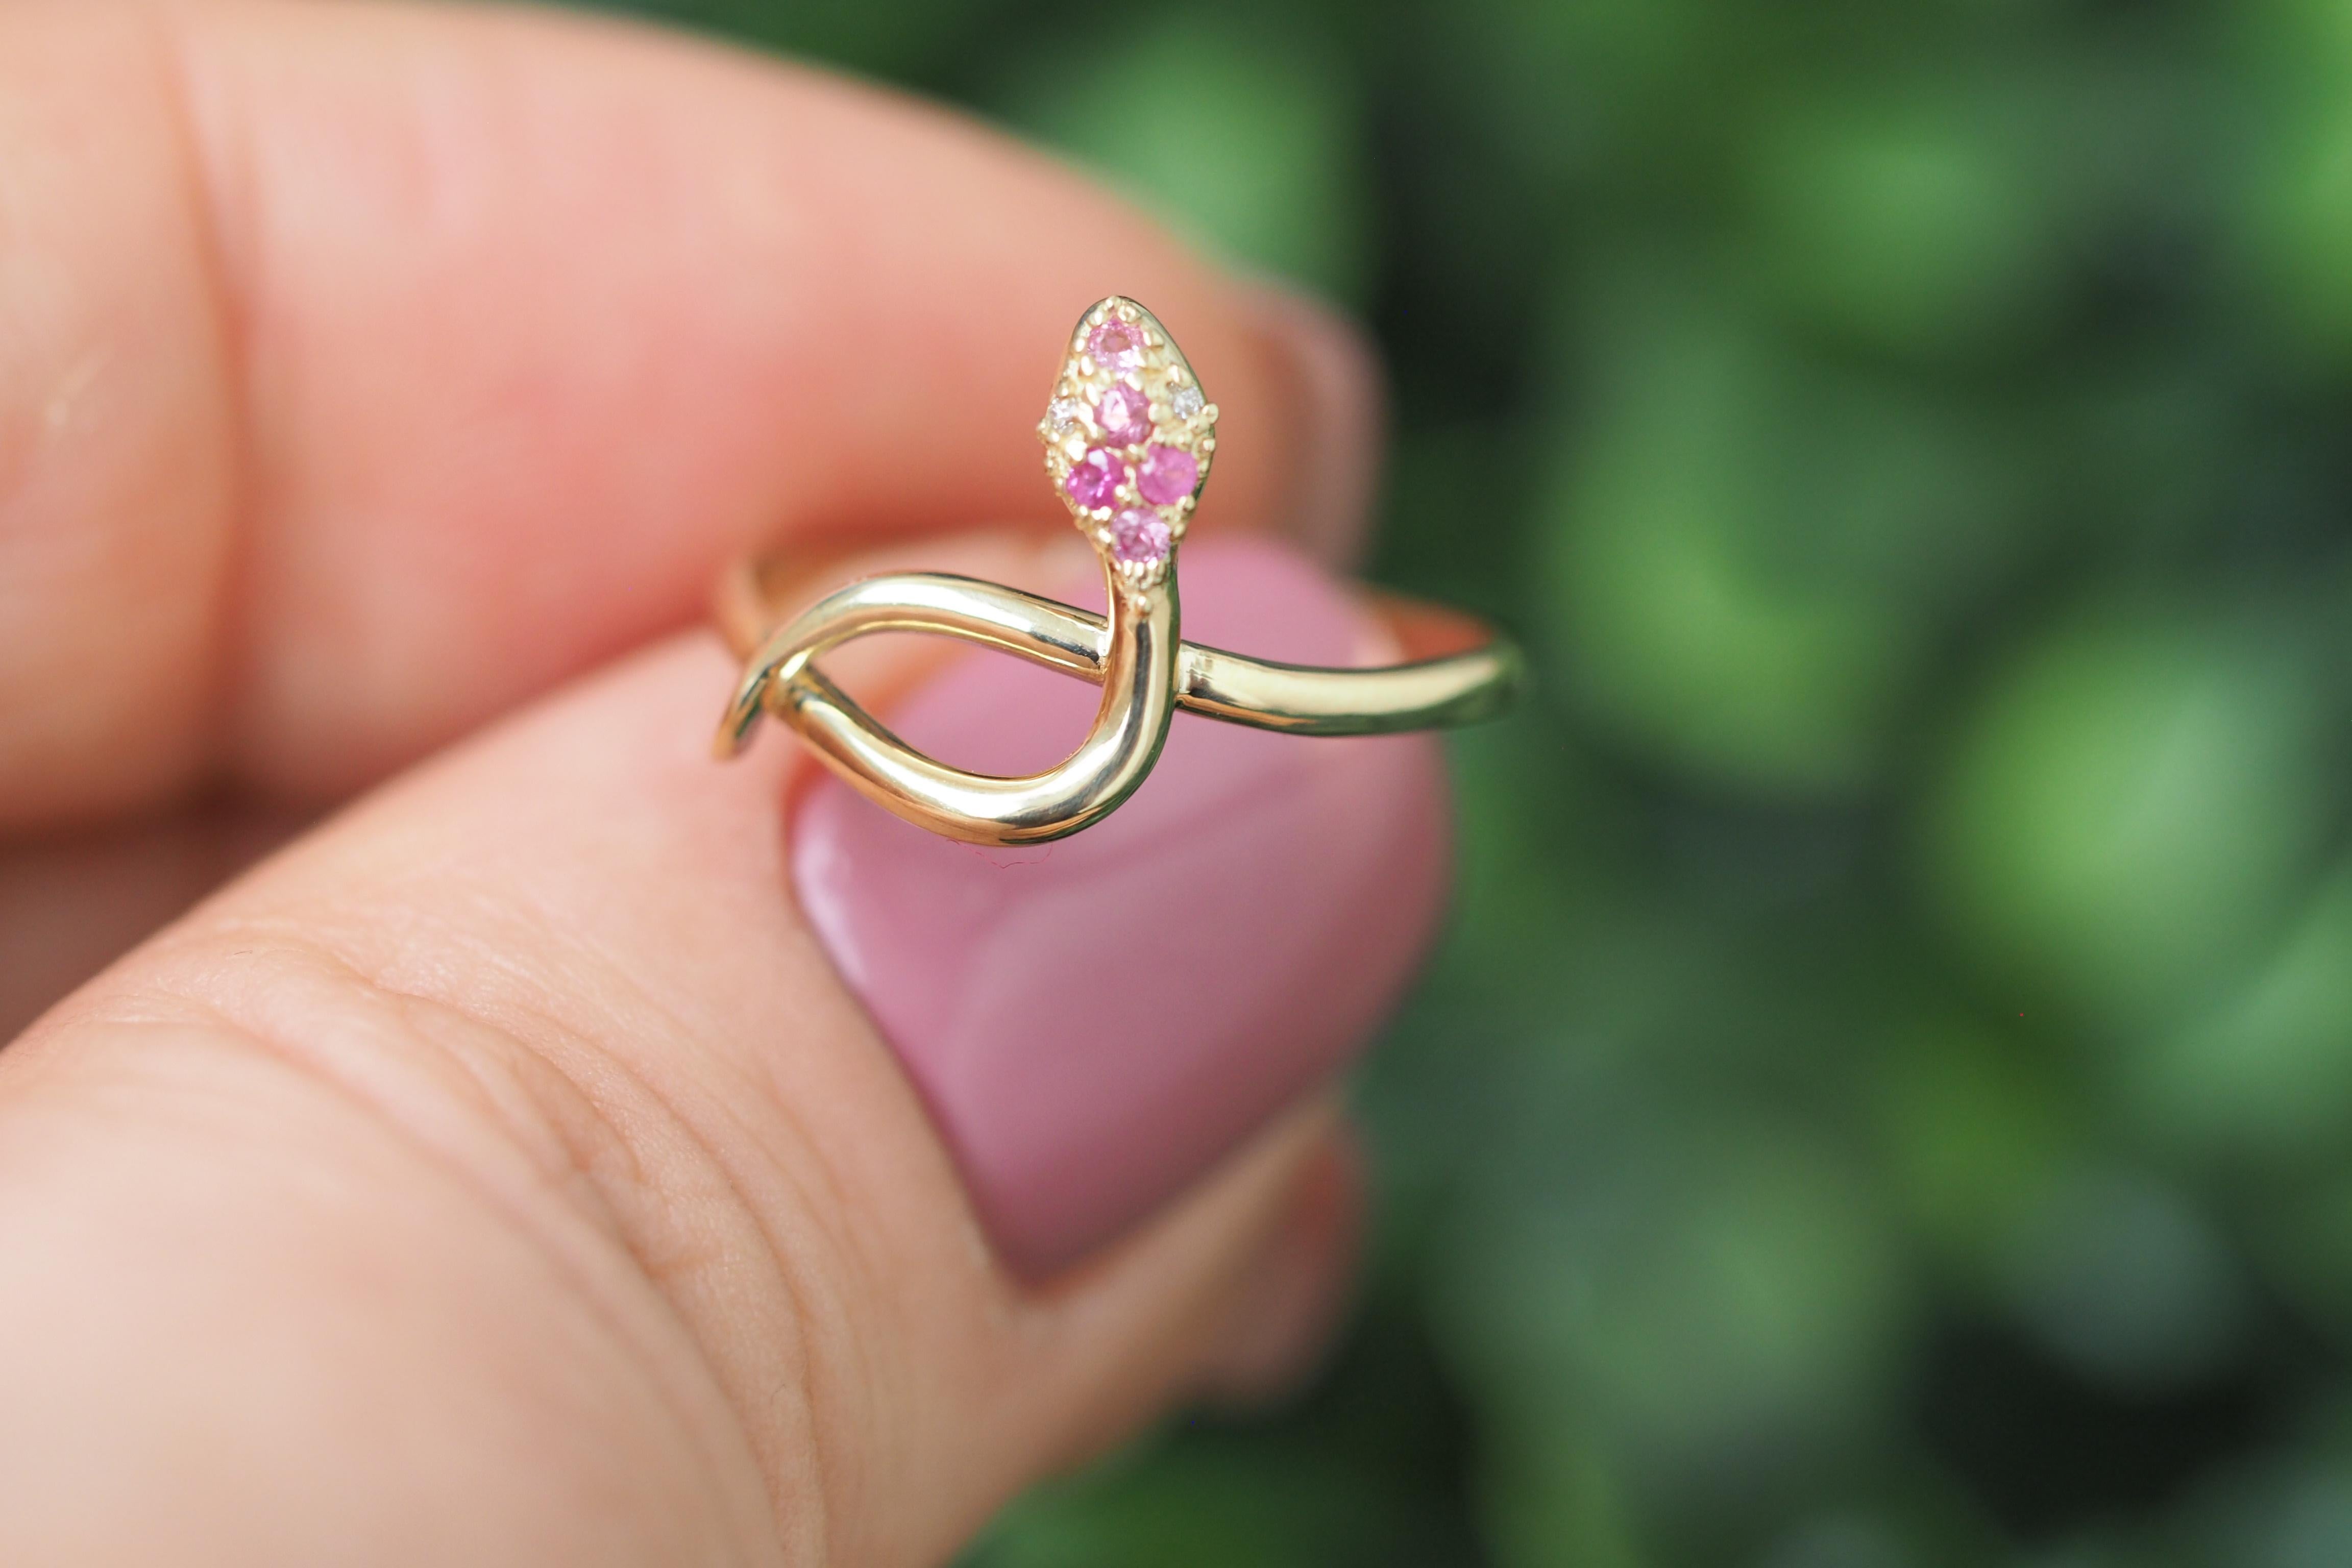 Snake Ring With Sapphires, Diamonds in 14k gold. 
Small snake gold ring. Pink sapphire gold ring. Serpentine gold ring. Animal Gold Ring.

Metal type: 14k solid gold
Weight: 1.70 g. (depends on size)

Gemstones:
Natural sapphires: 5 pieces, weight -